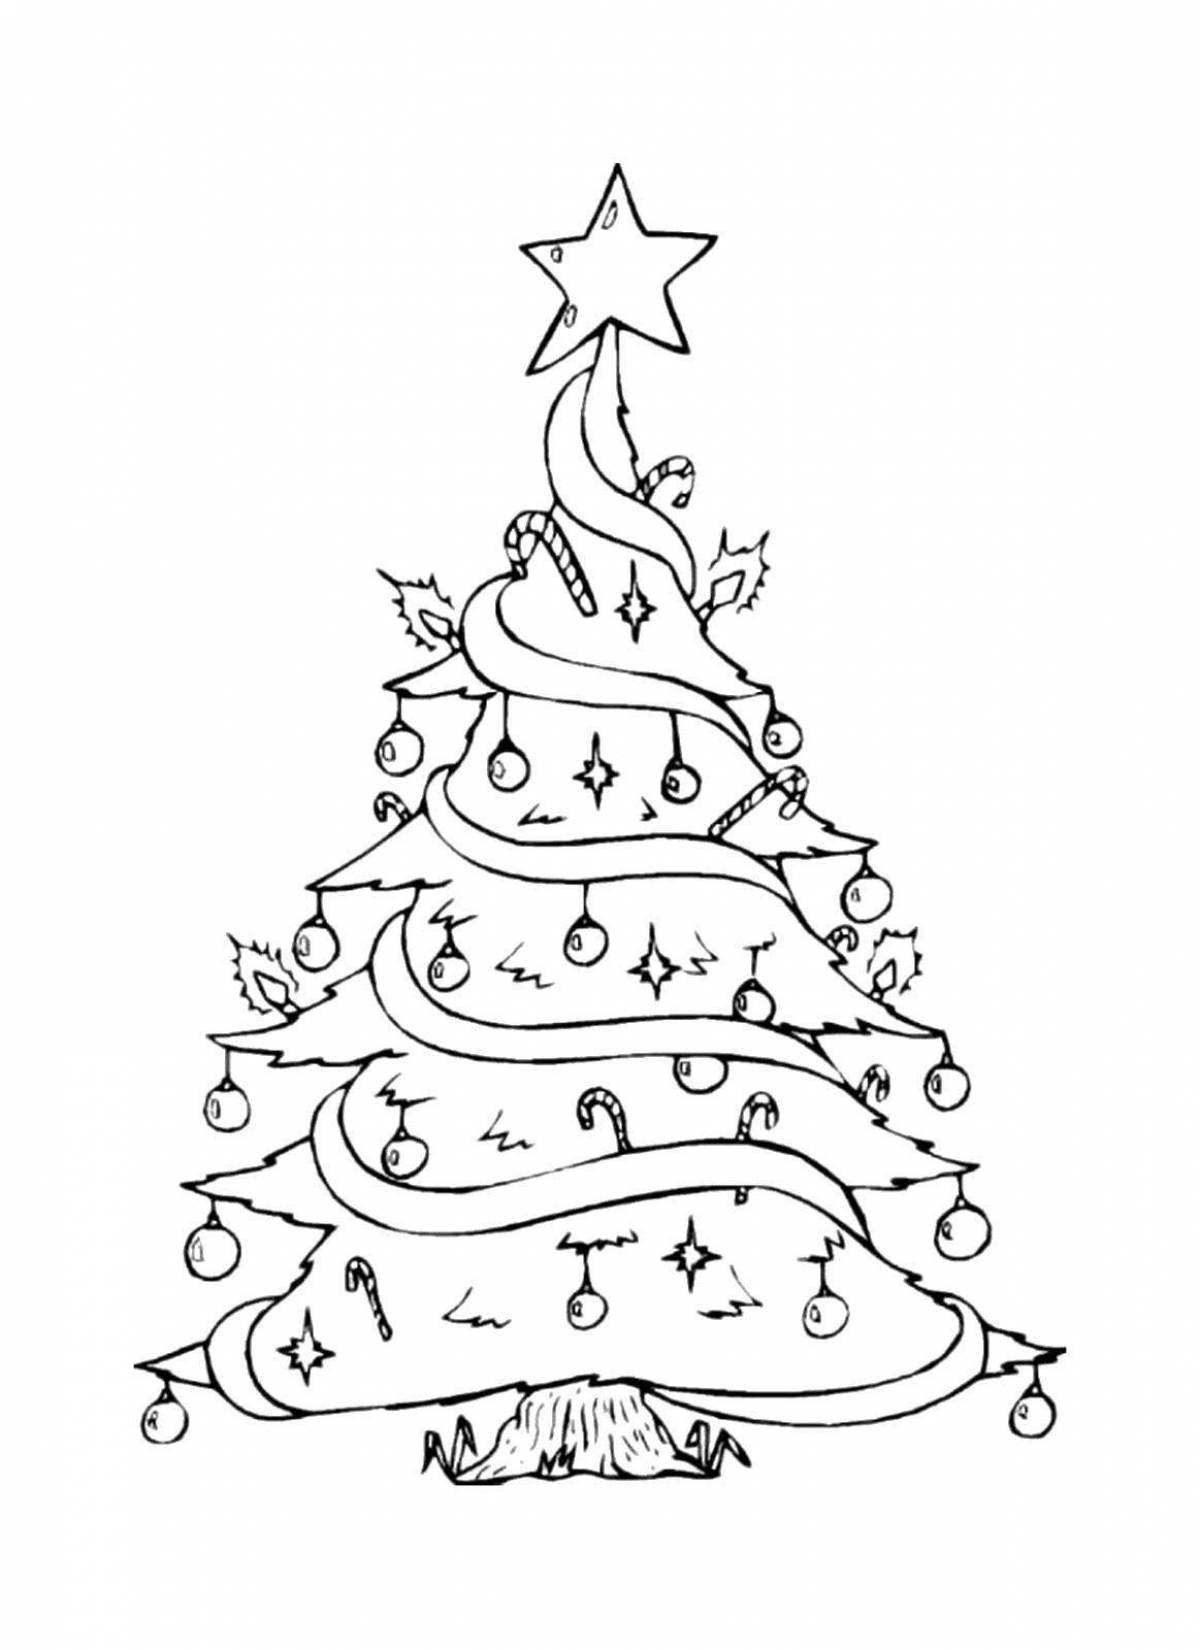 Shining Christmas tree coloring book for 6-7 year olds